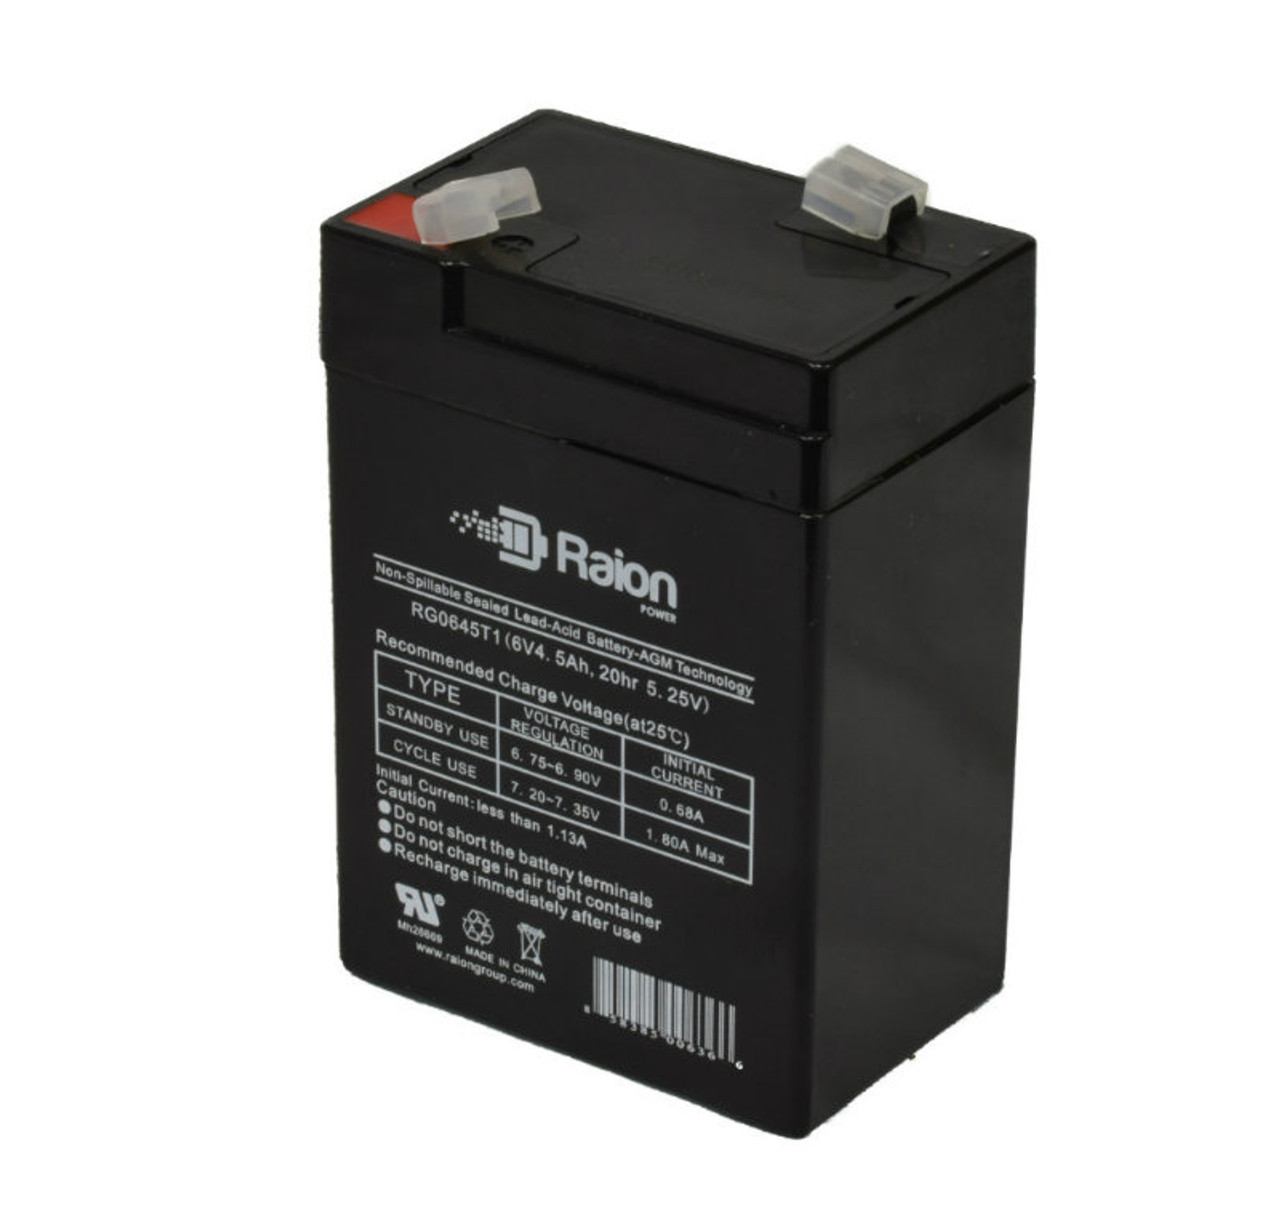 Raion Power RG0645T1 6V 4.5Ah Replacement Battery Cartridge for Vision CP645LA